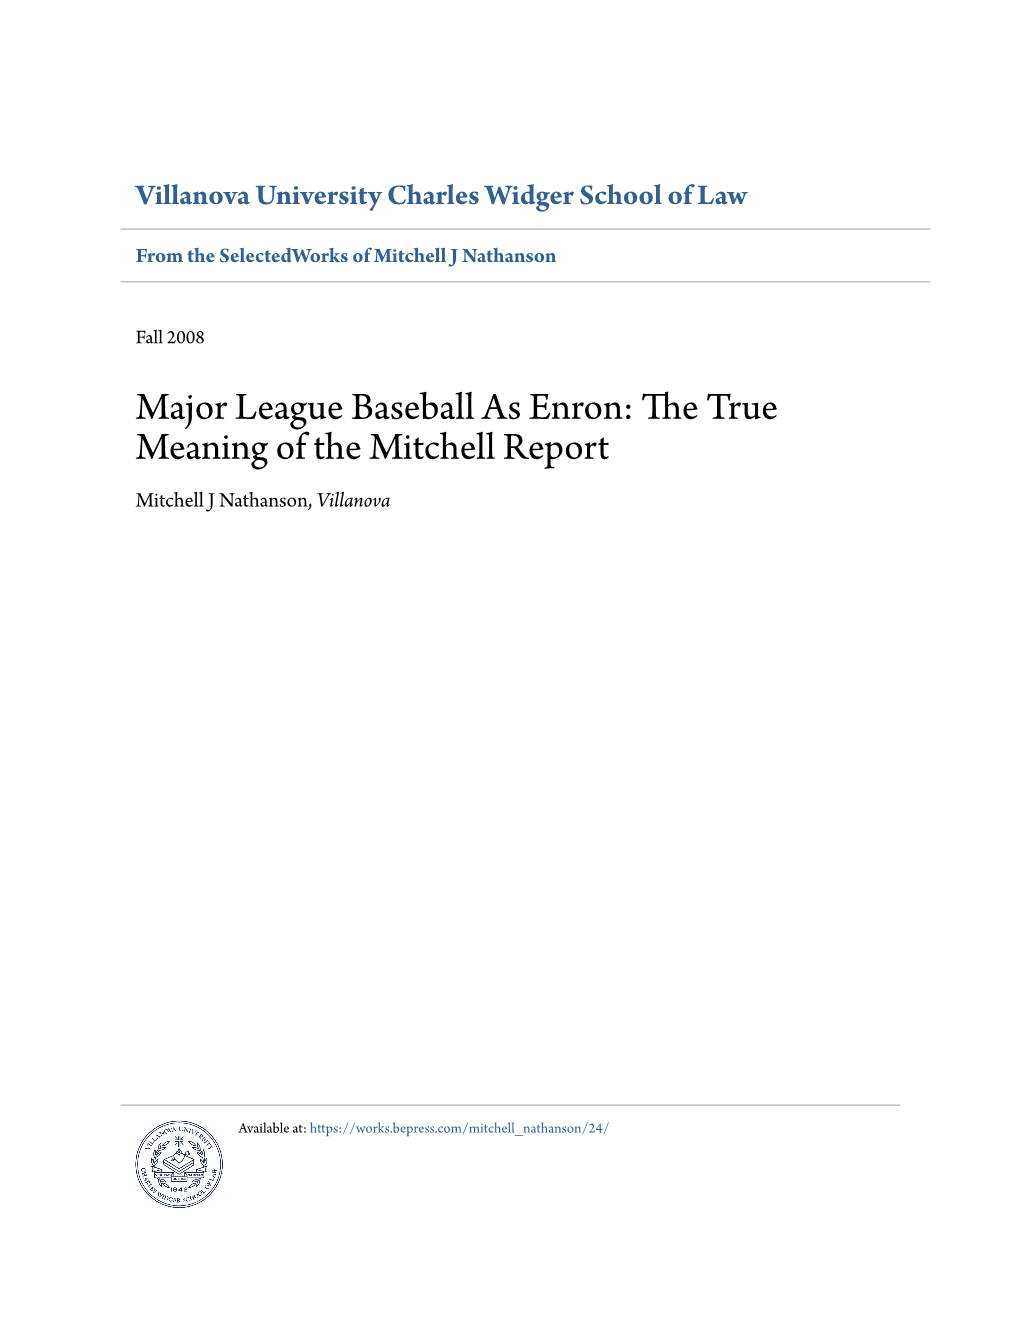 Major League Baseball As Enron: the True Meaning of the Mitchell Report